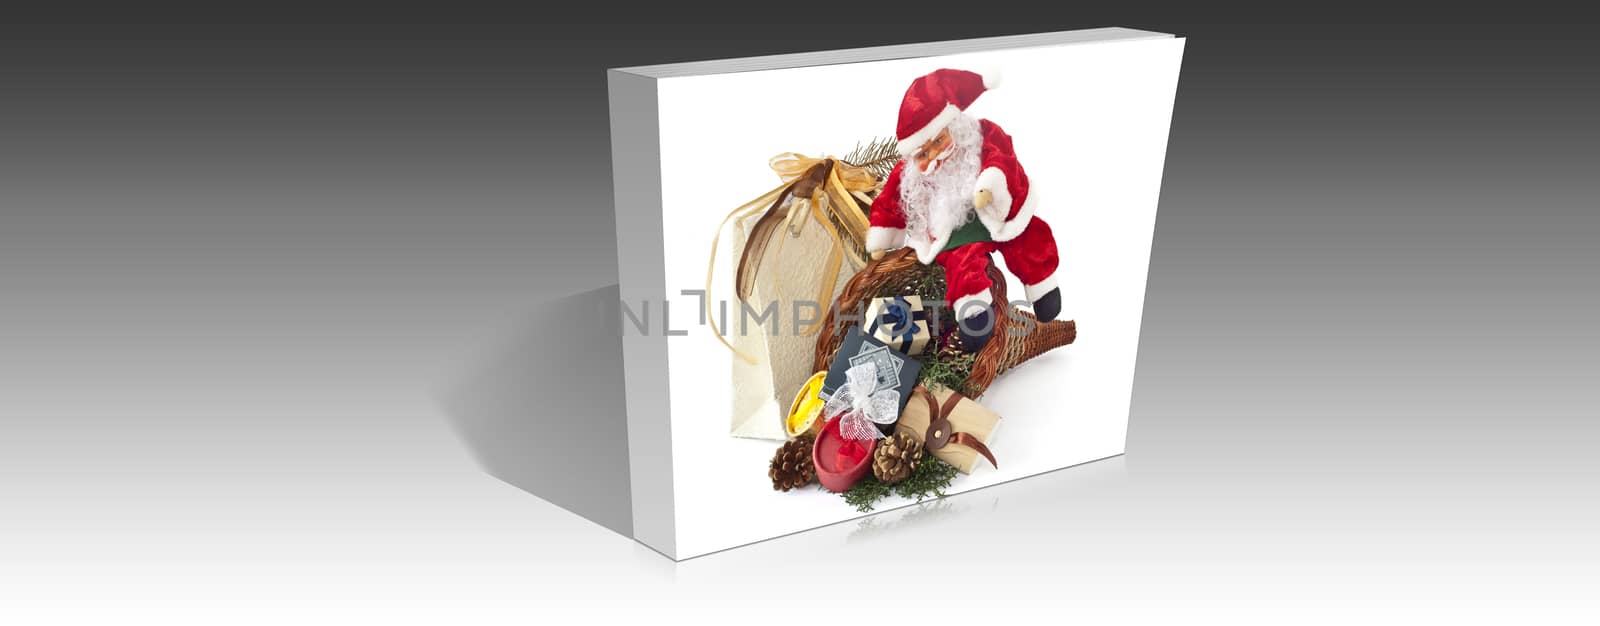 Cornucopia with gifts and Santa Claus